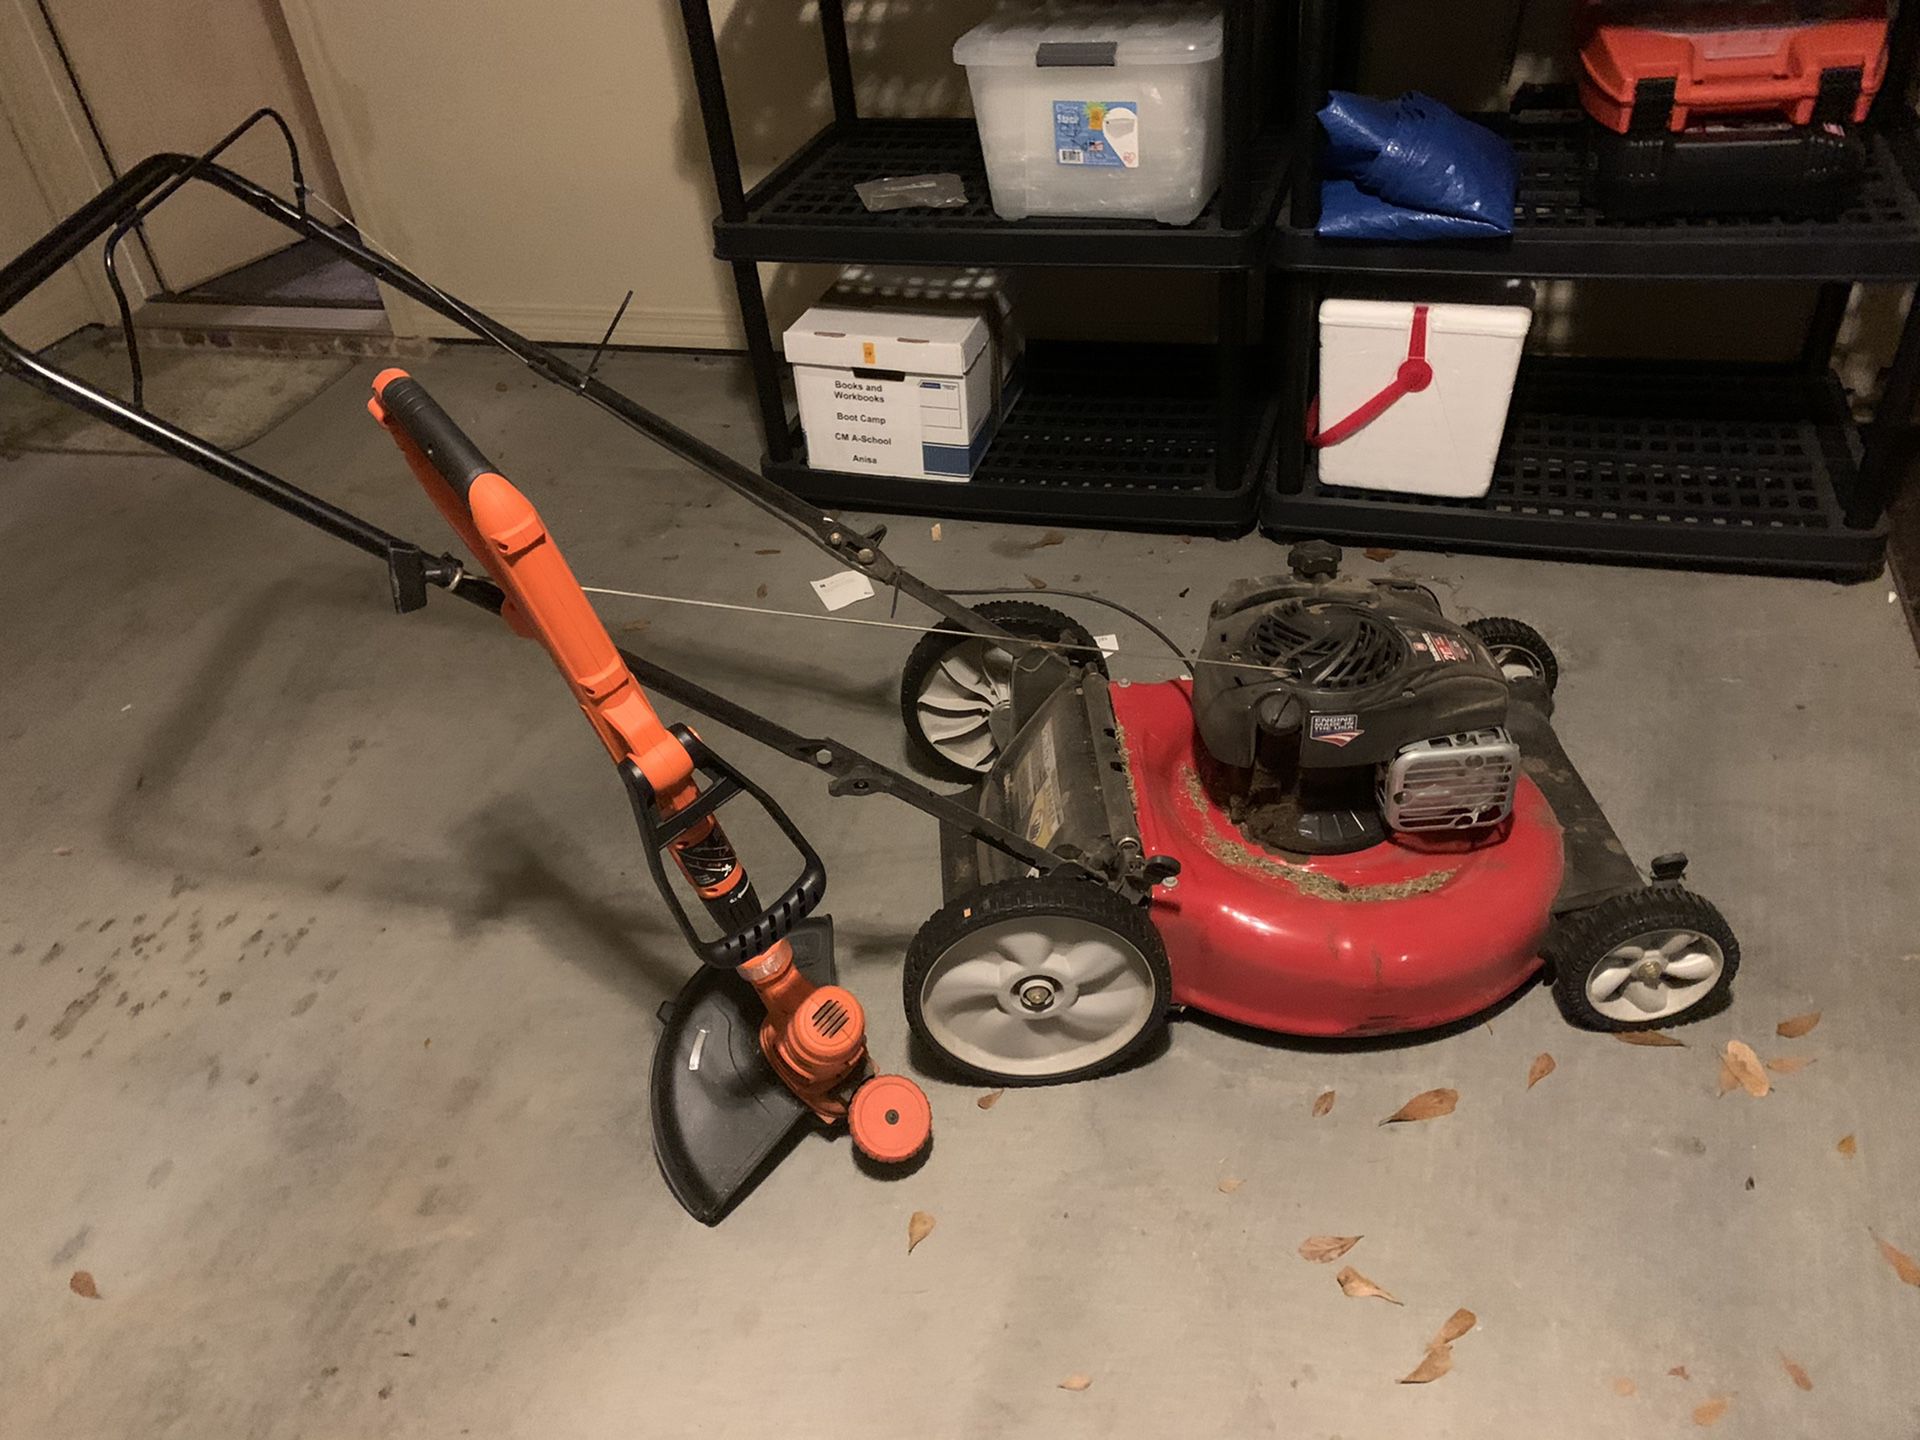 Briggs and Stratton mower and black & decker hedge trimmer